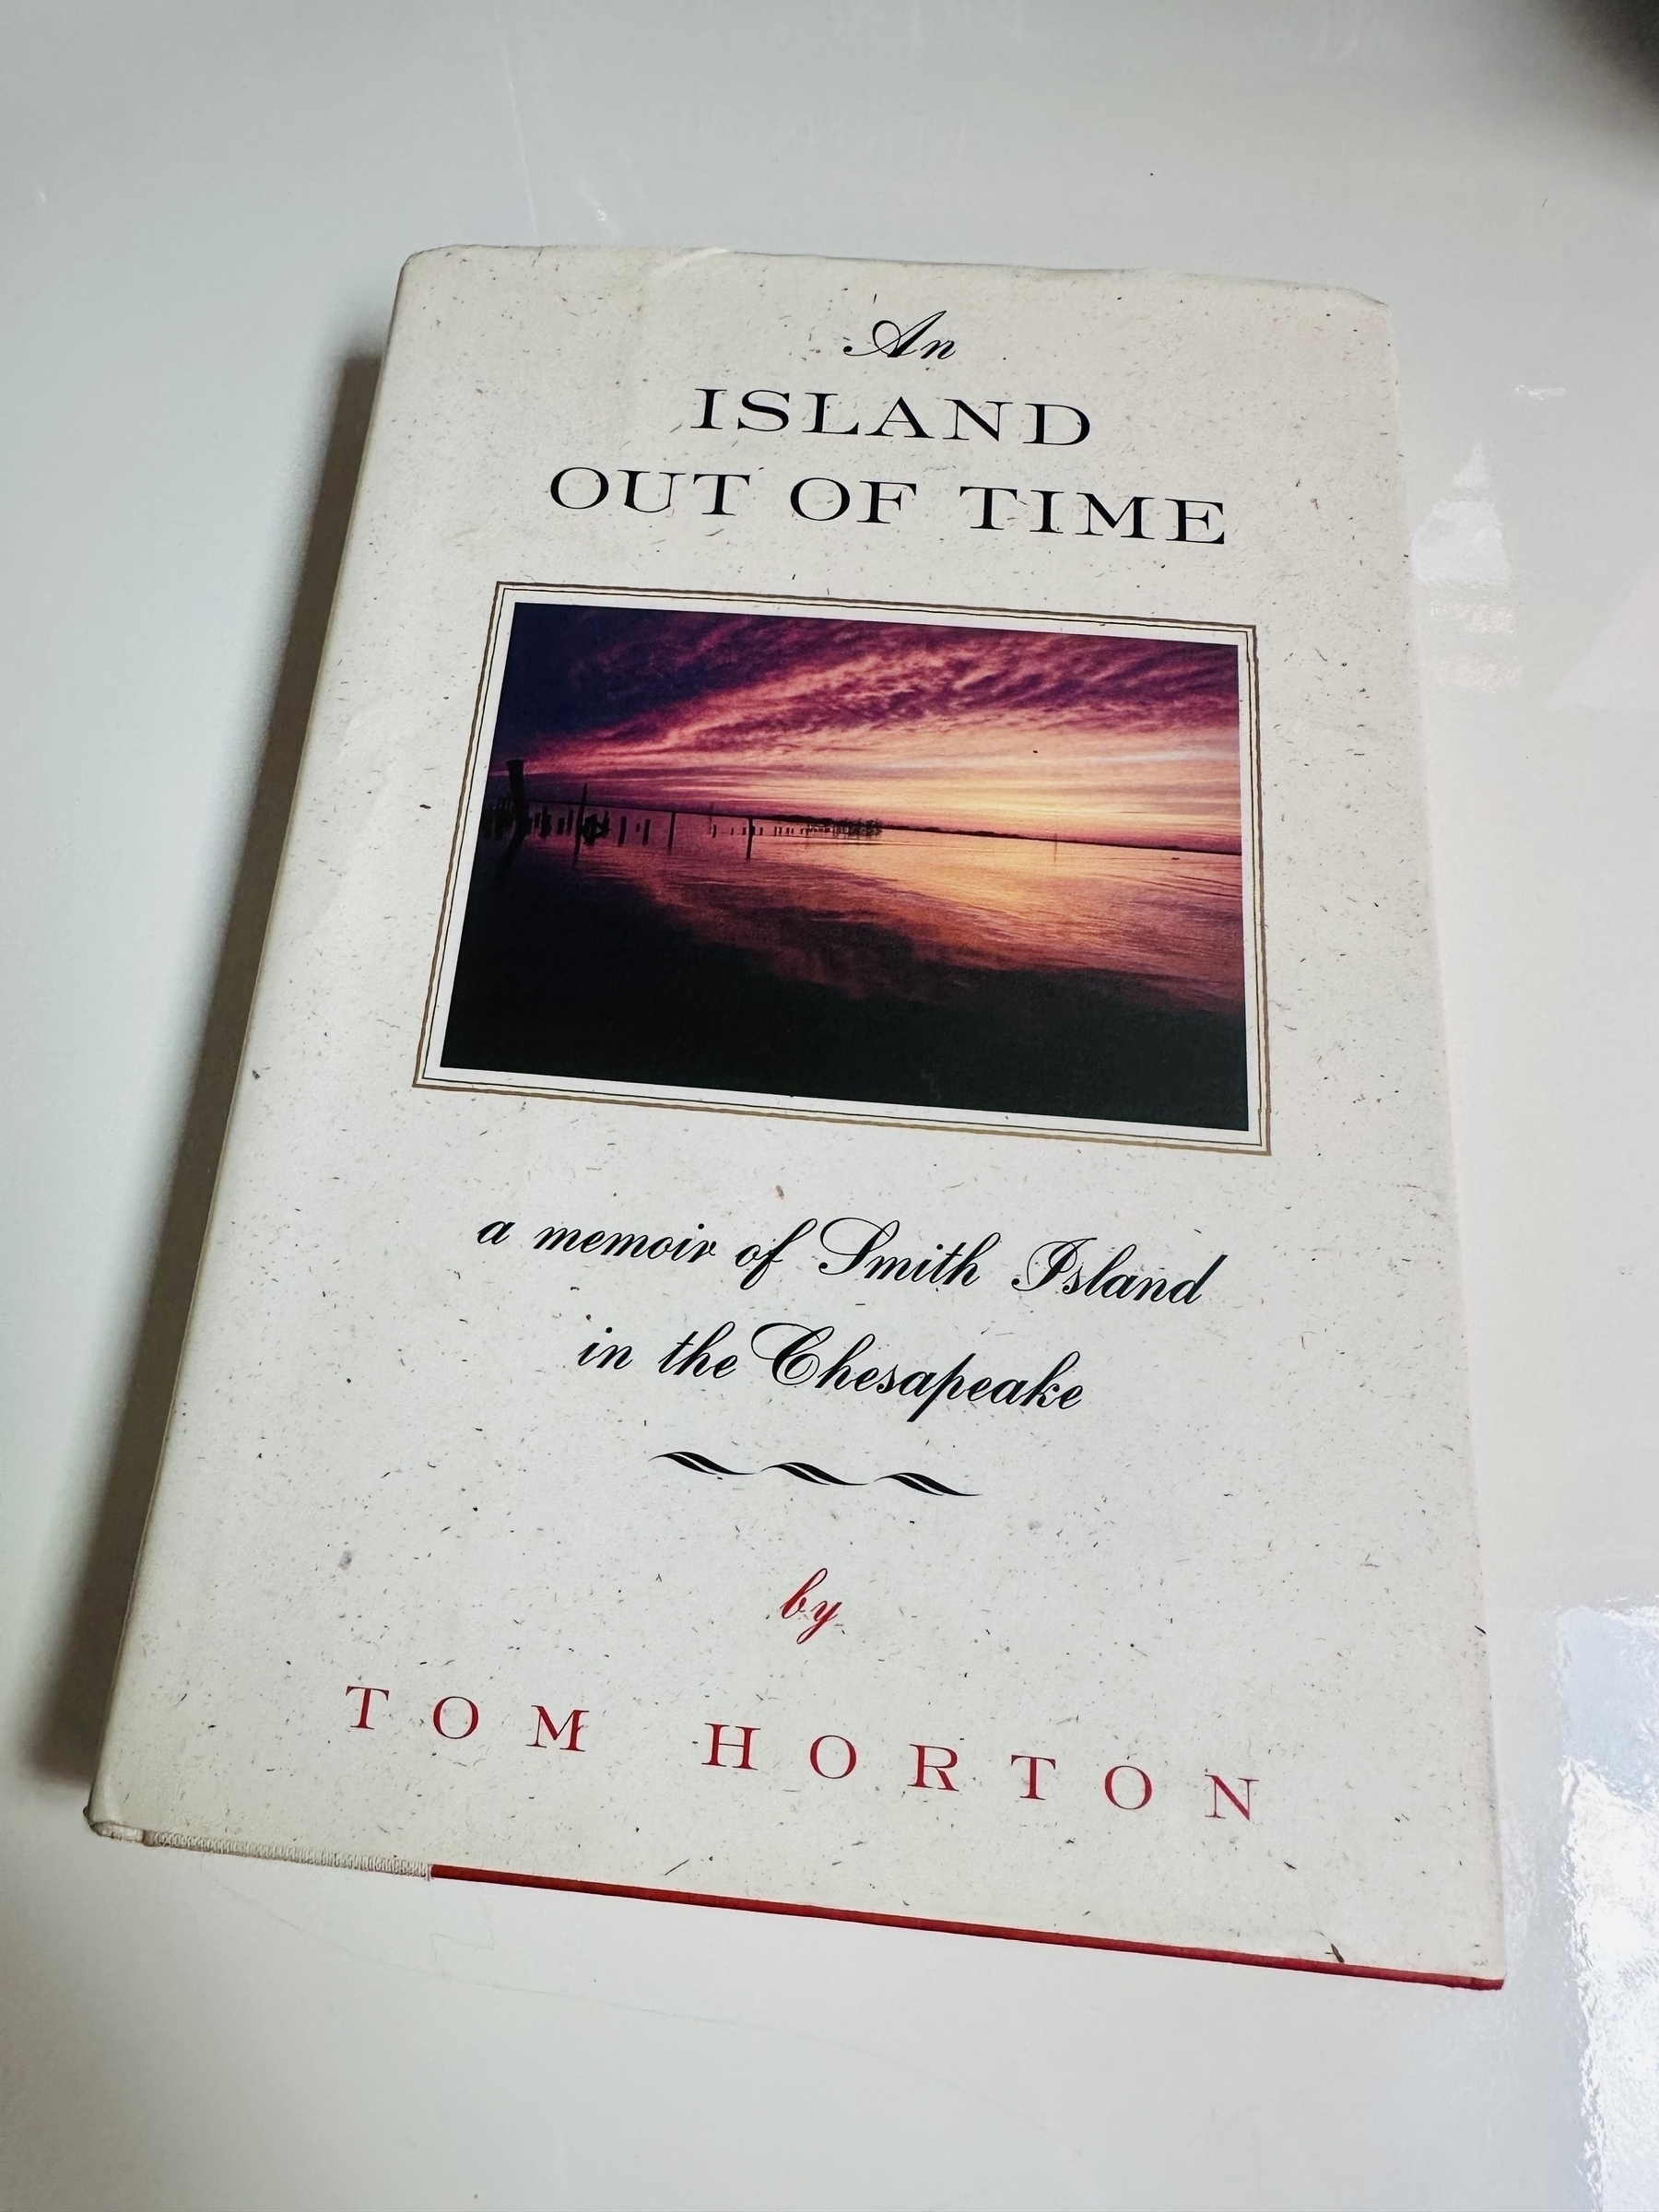 Front cover of the book “An Island out of Time” by Tom Horton